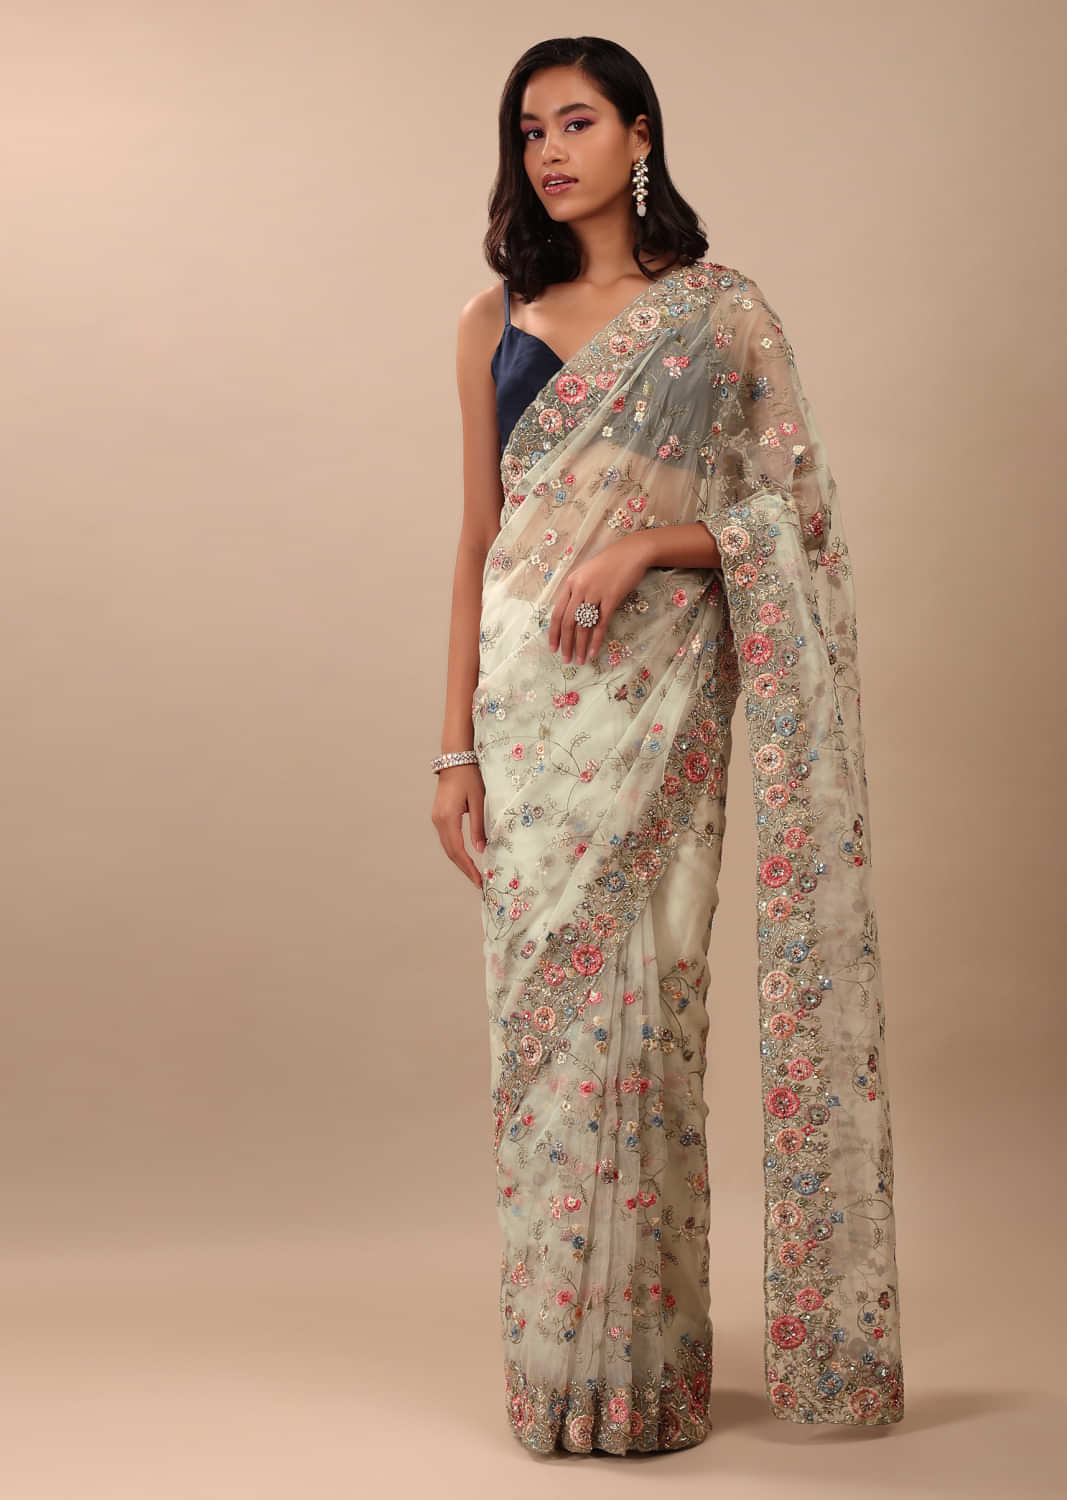 Silver Berch Grey Organza Saree Fully Embroidered In Multi-colour Floral Jaal Pattern With Cut Dana & Moti